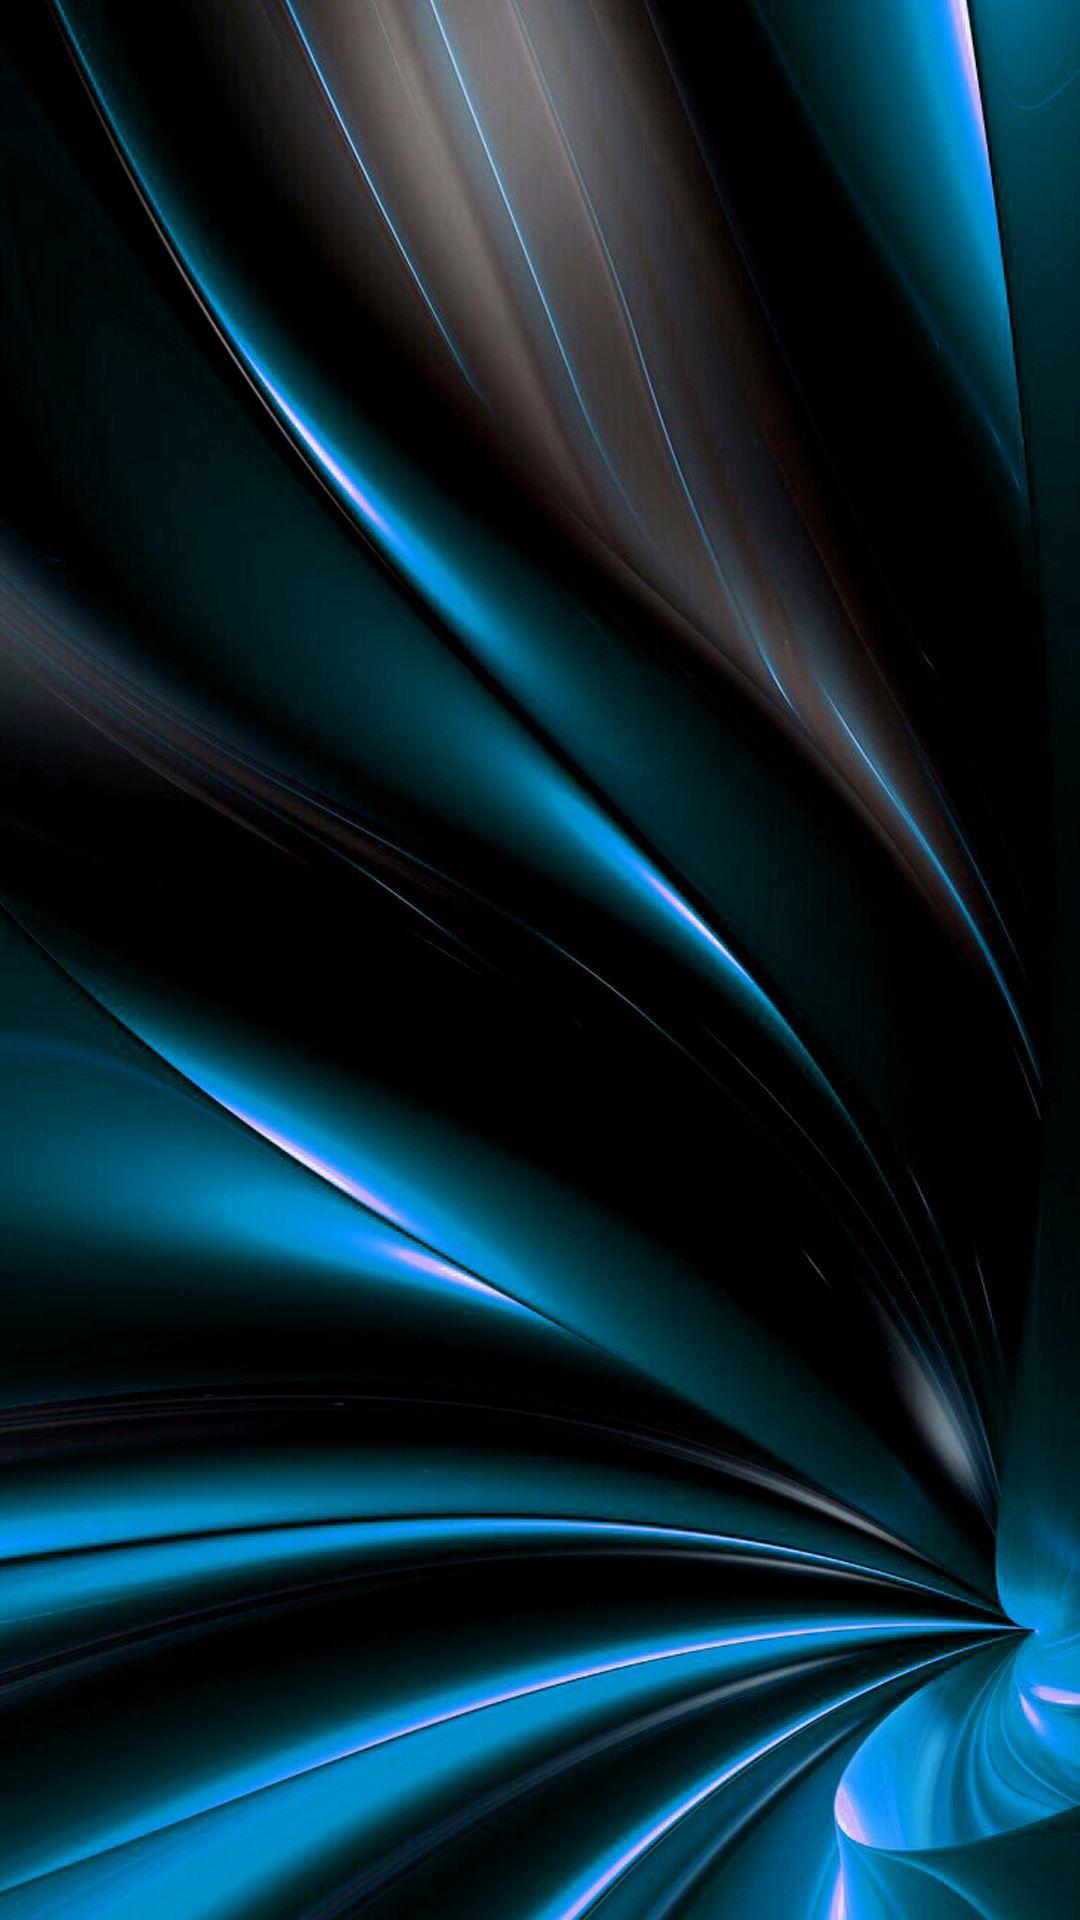 Black And Blue Phone Hd Wallpapers - Wallpaper Cave